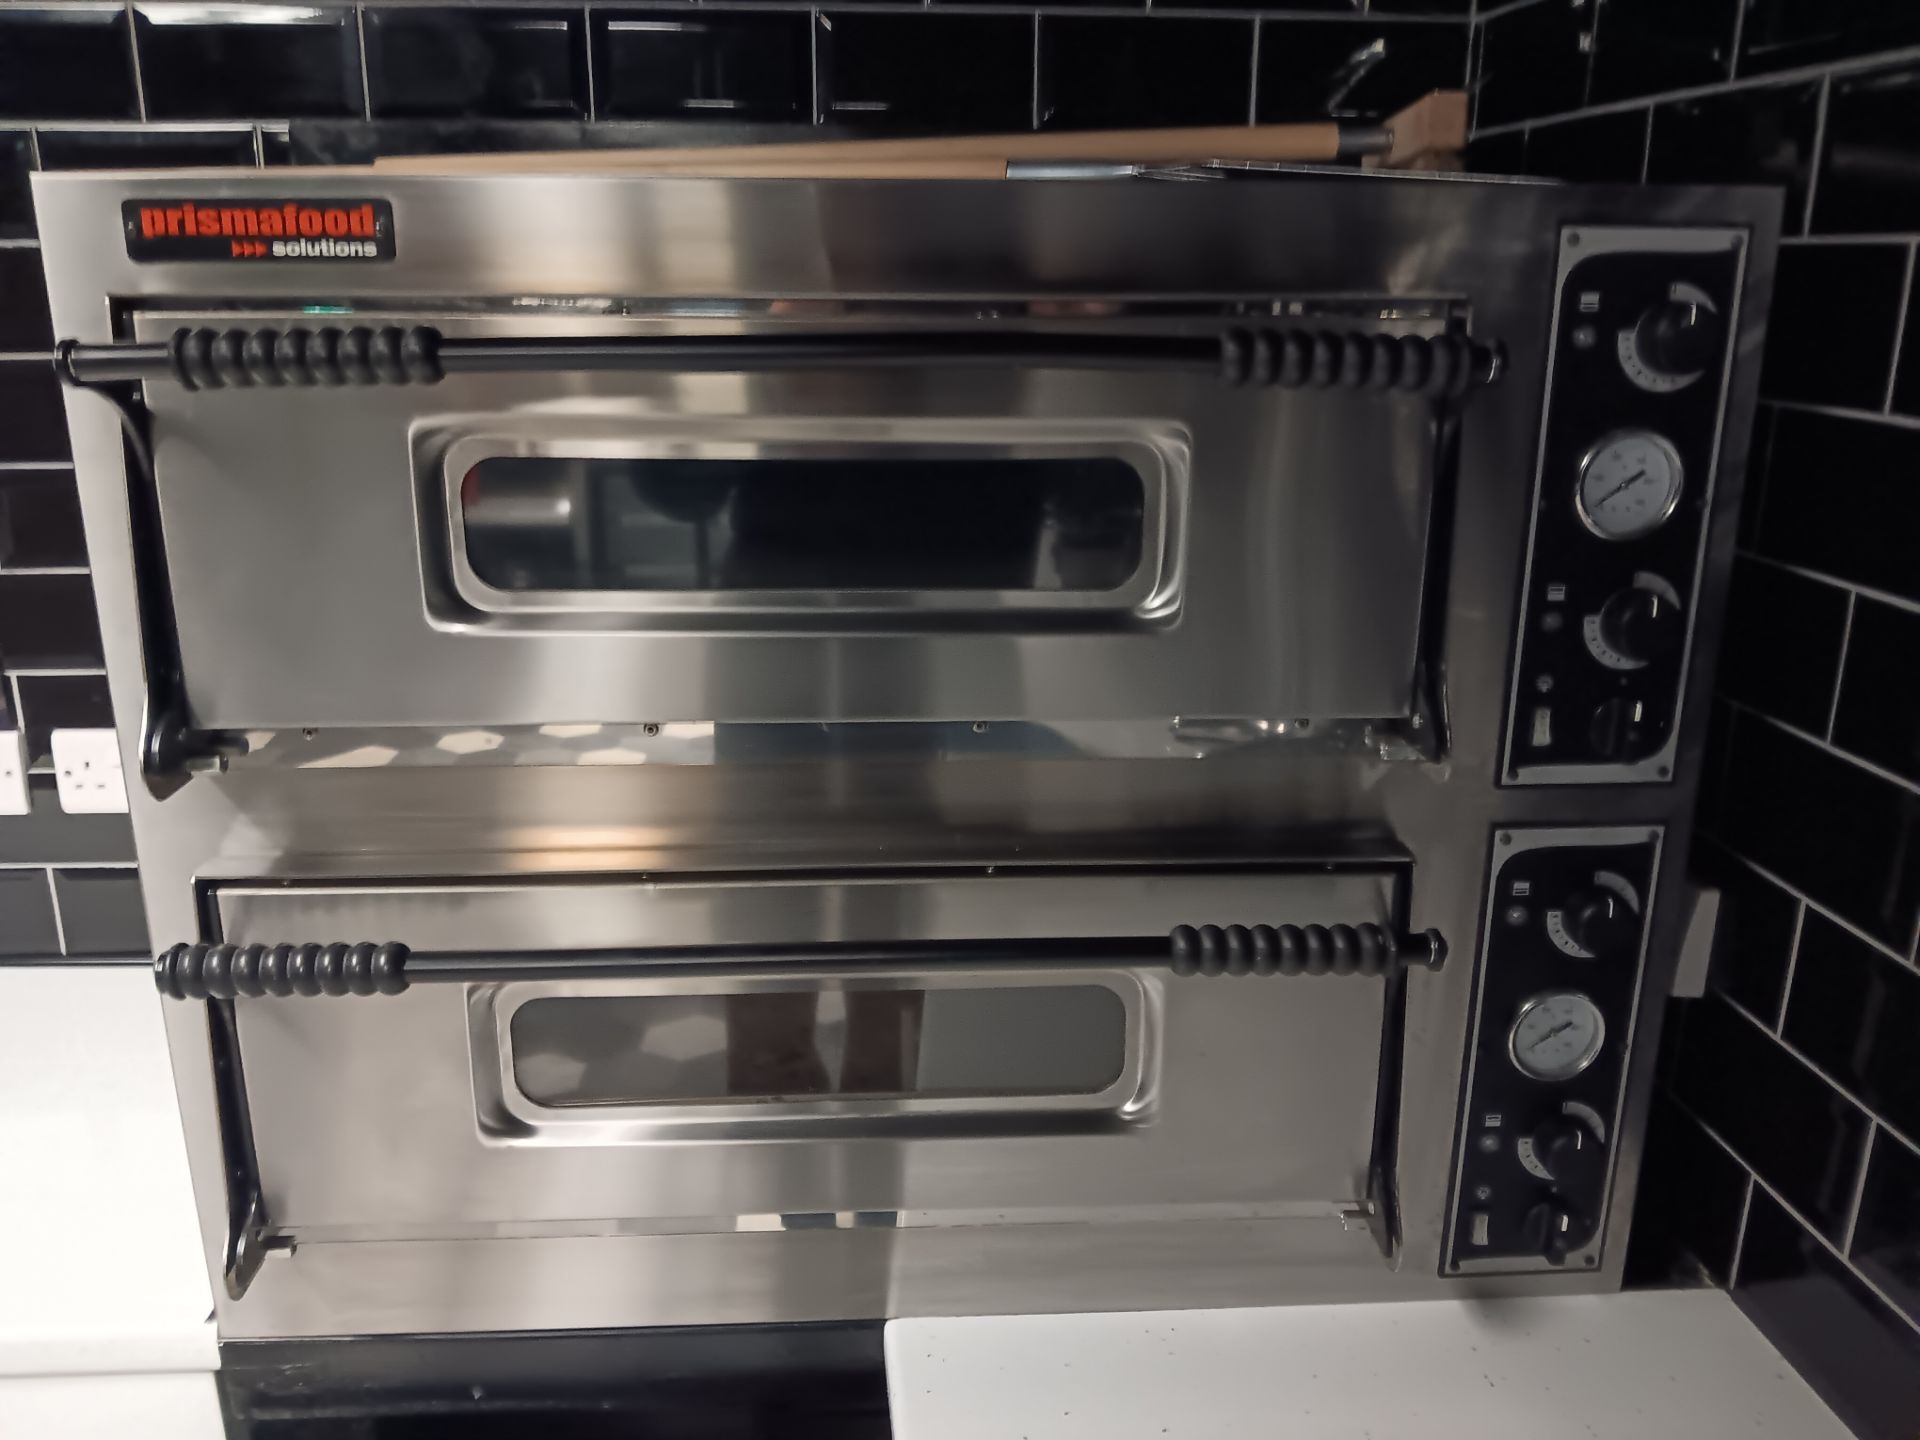 Prismafood 2-Deck Pizza Oven – Cost New £2,400 - Hard Wired - Buyer to Disconnect & Make Safe by - Image 2 of 2